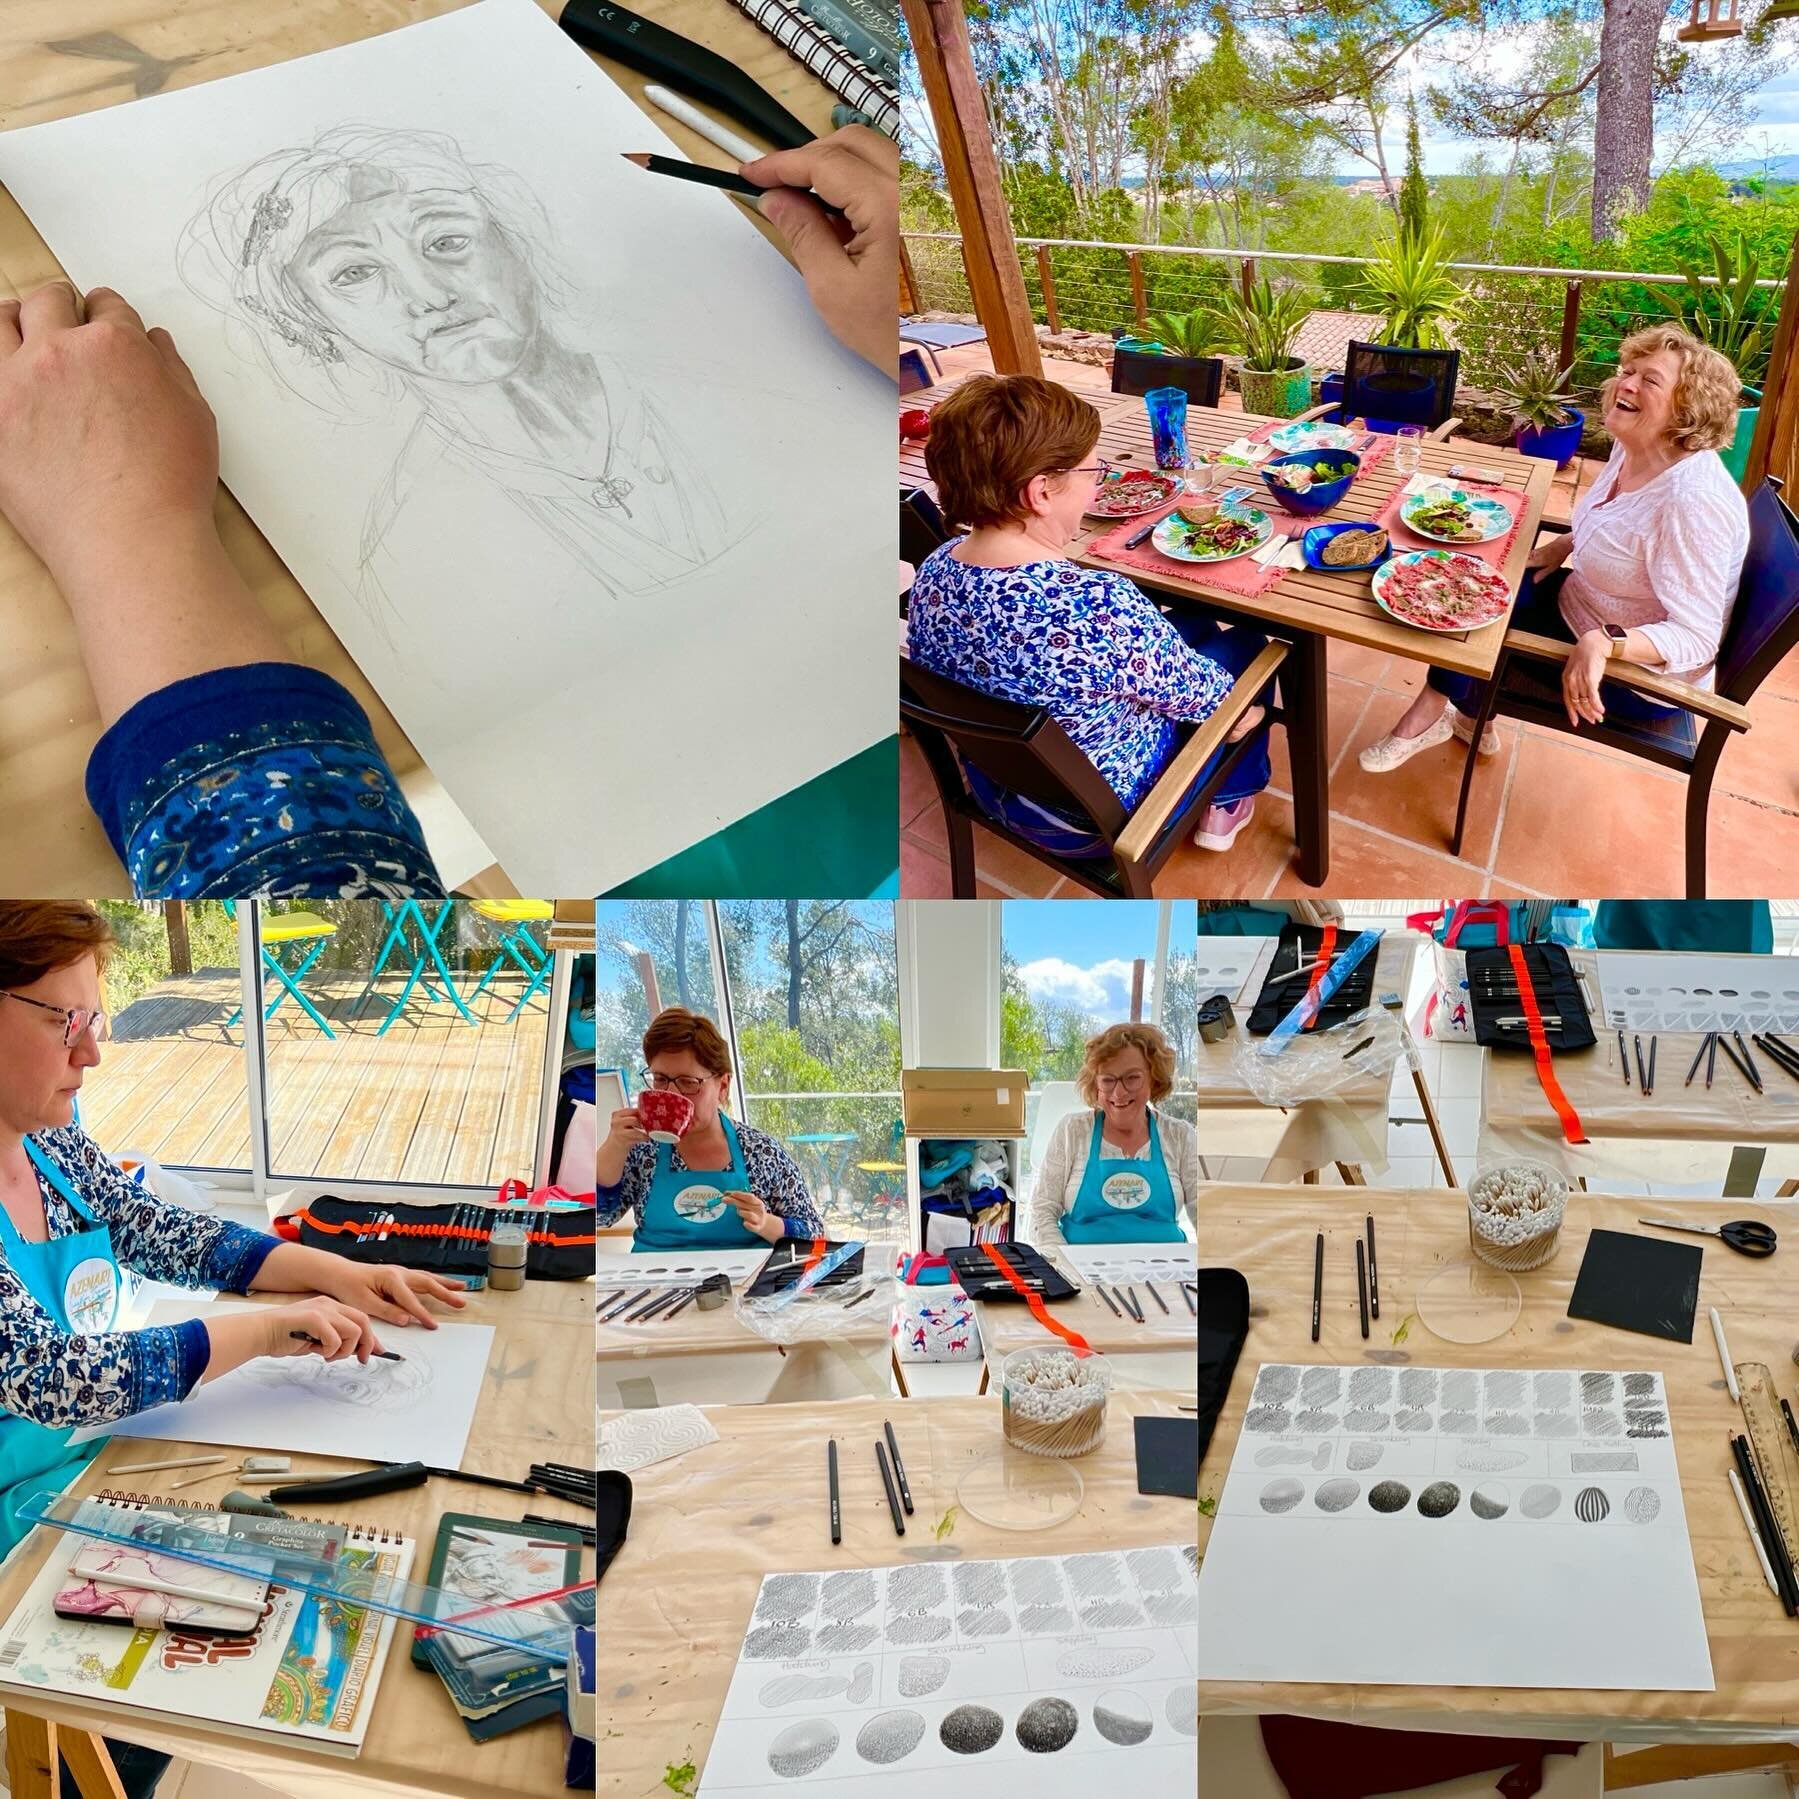 AZENART PORTRAITS PAINTING HOLIDAY PROVENCE.  DAY 1 demo. ✍️🎨🖌️🖼️🏝️☀️👒🌻

- Examining materials and learning how to use it. 
- Graphite pencils: Pencils containing more graphite are softer and produce darker marks, while pencils containing more 